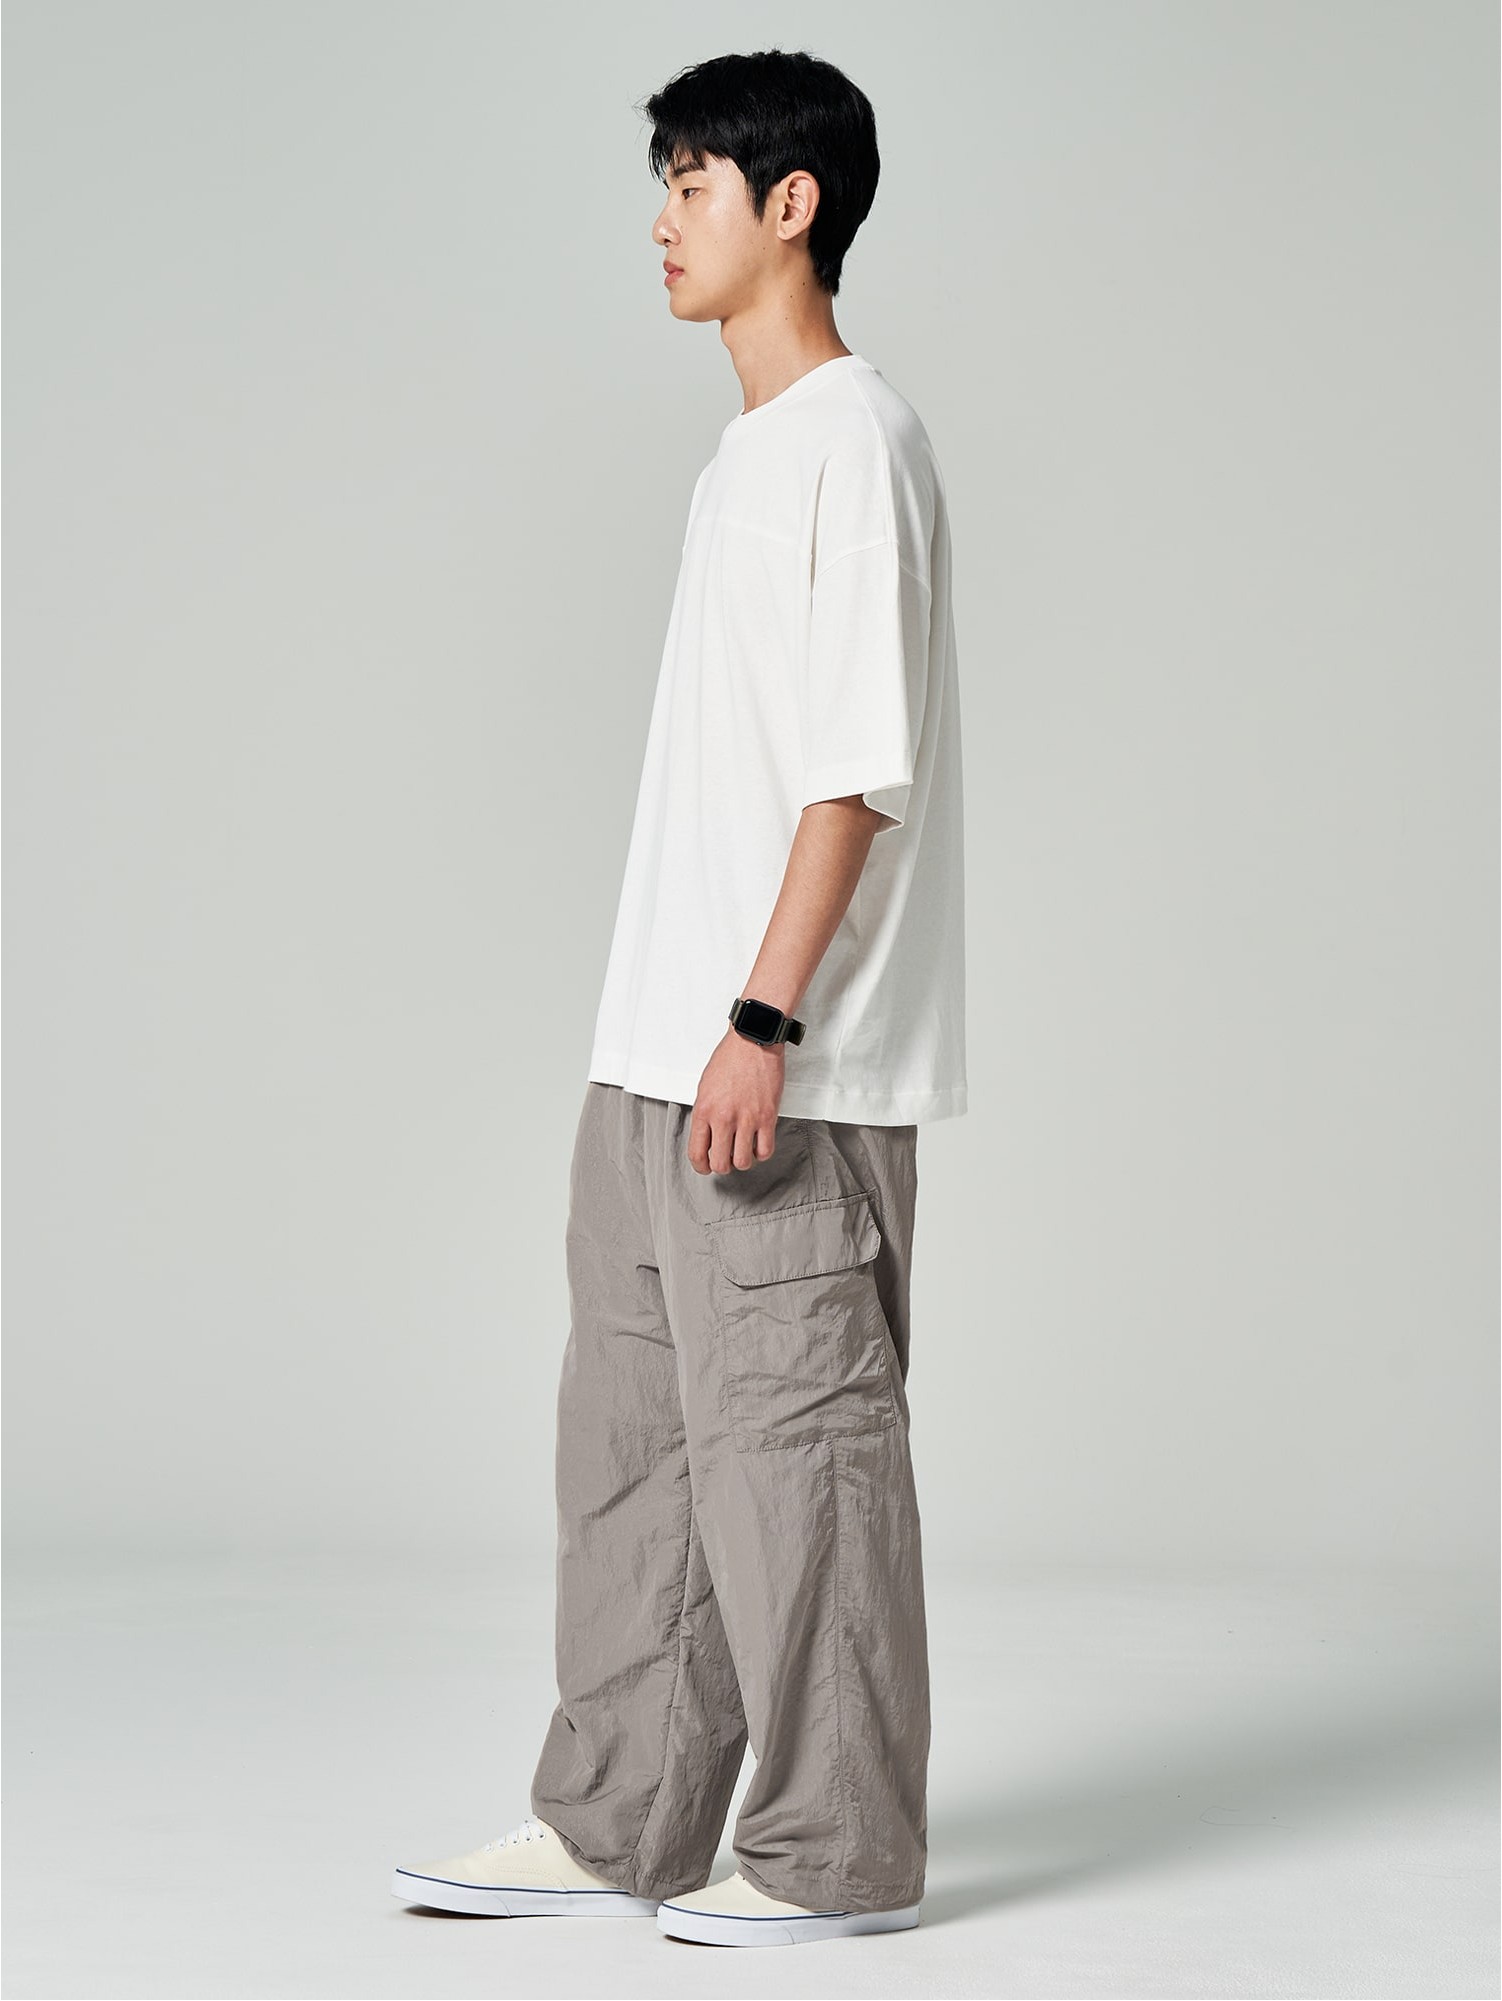 How to Wear Cargo Pants - the gray details